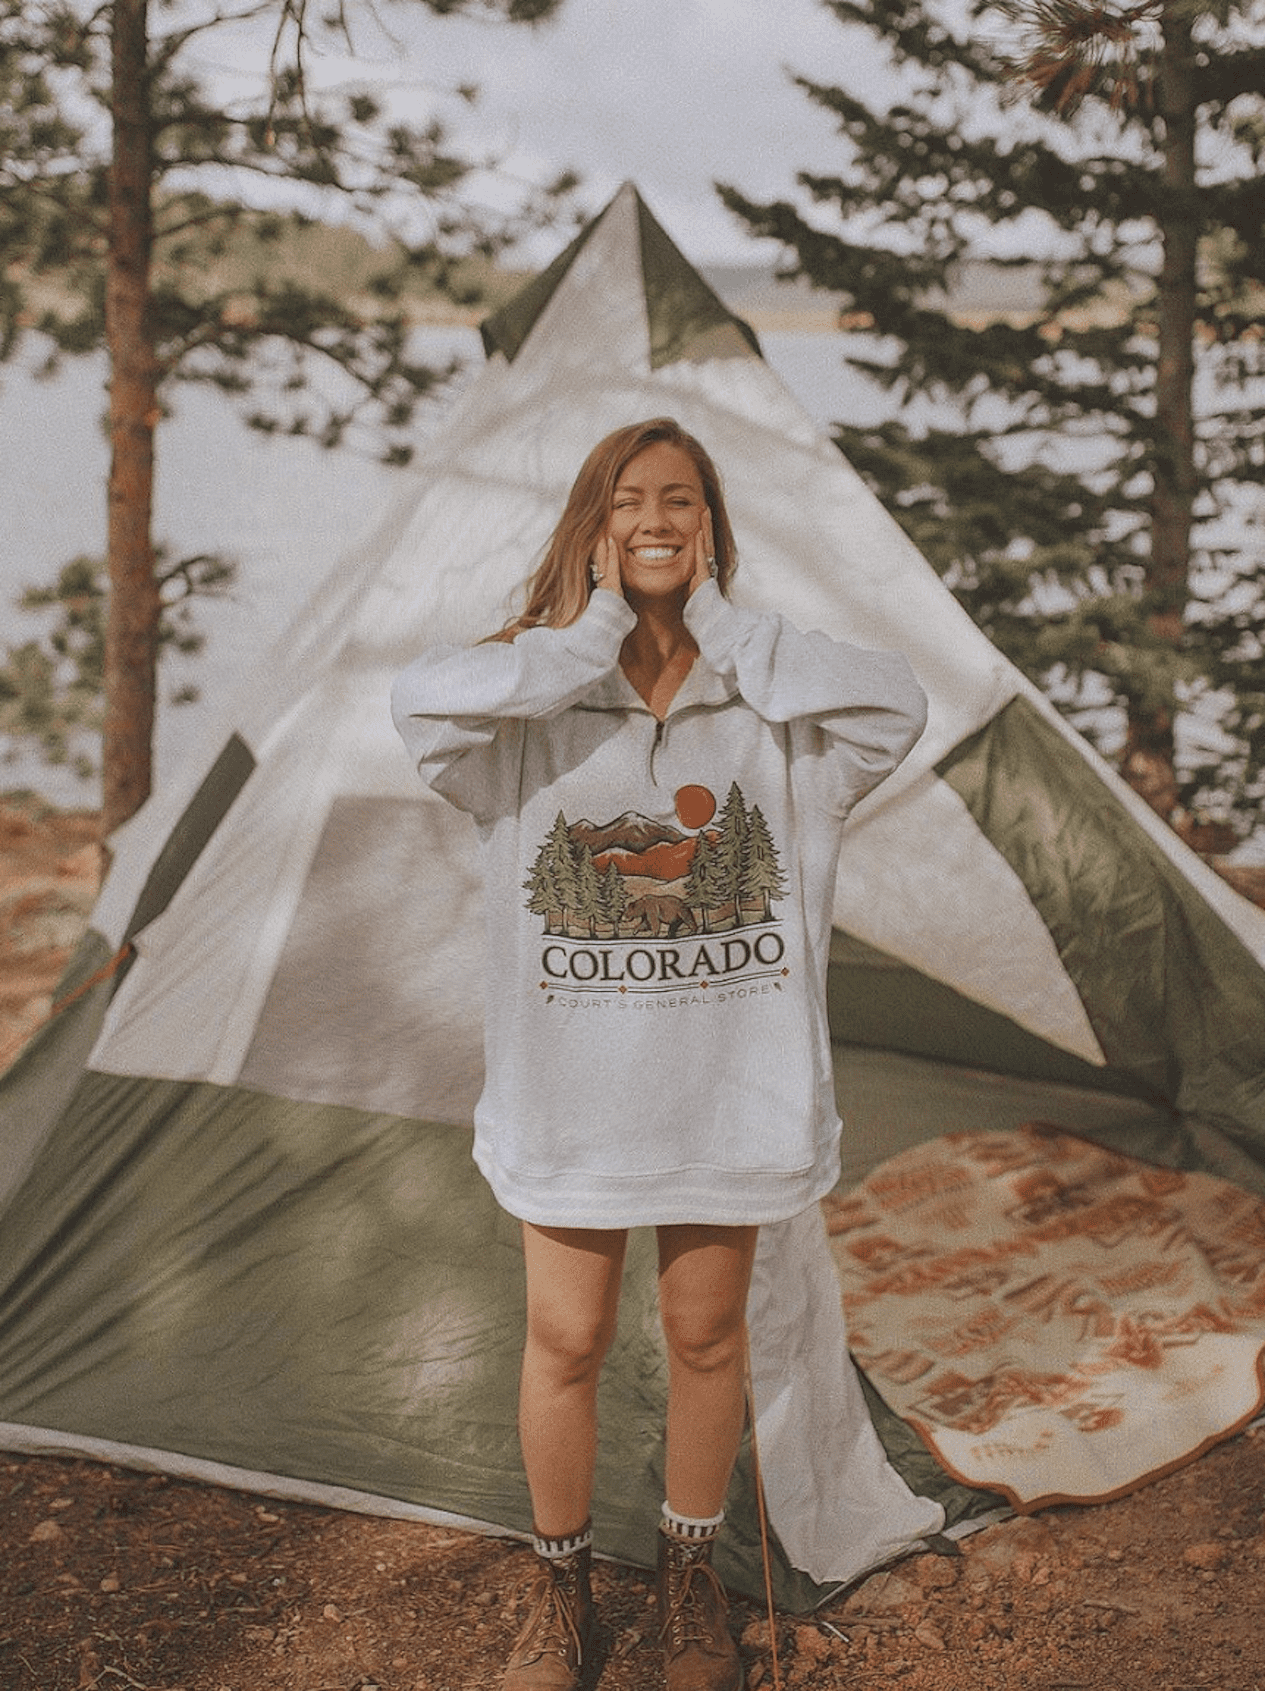 Girl wearing a baggy sweatshirt and hiking boots in front of a tent.